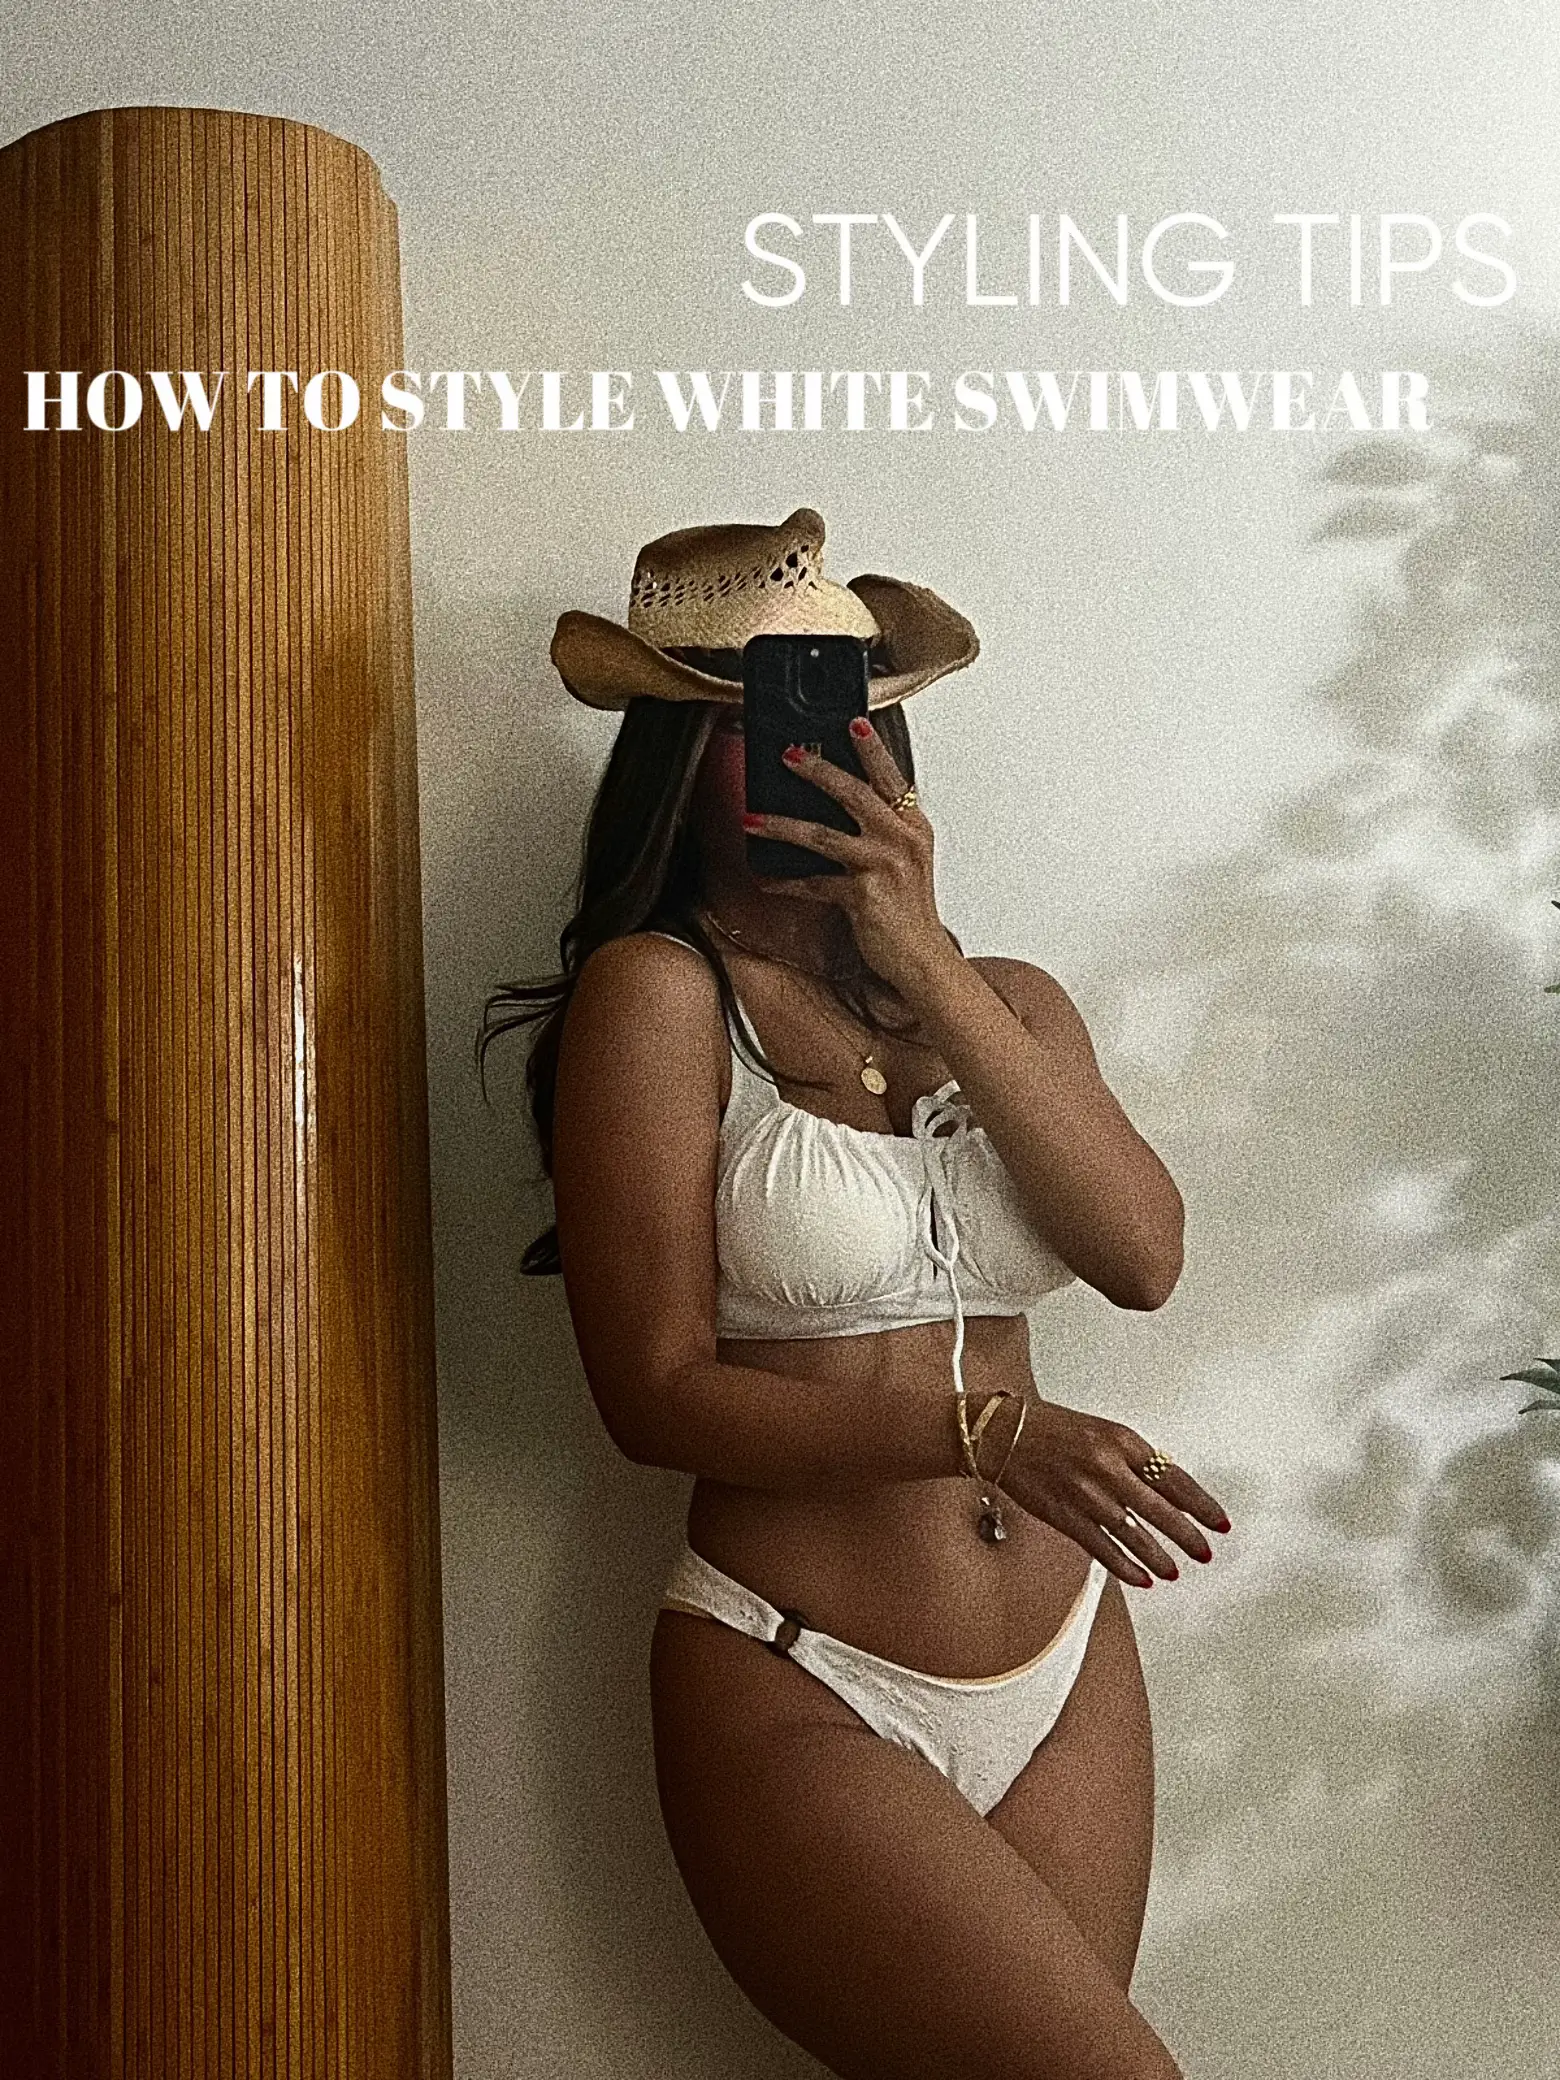 HOW TO STYLE A WHITE SWIMWEAR, Gallery posted by Teffy Mesa UGC